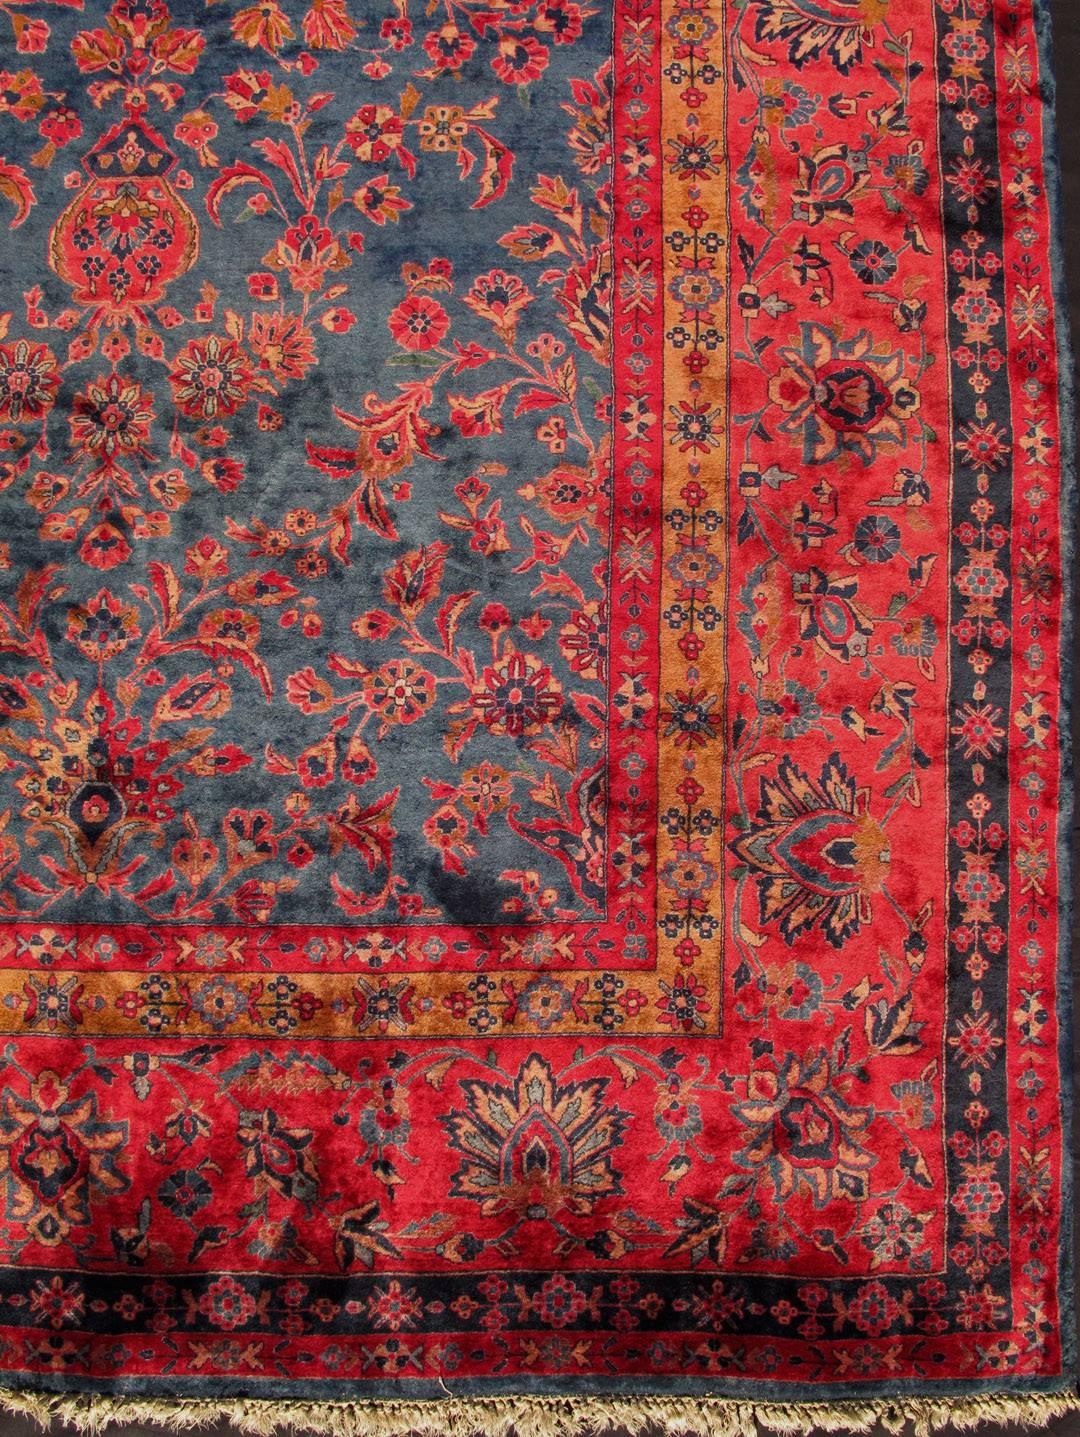 Distinct colors that are similar yet starkly rendered flow alongside each other in this gorgeous antique rug. Bright red sets the attractive background for the largest border, which is outlined by two thinner borders. Within the frames are flowing